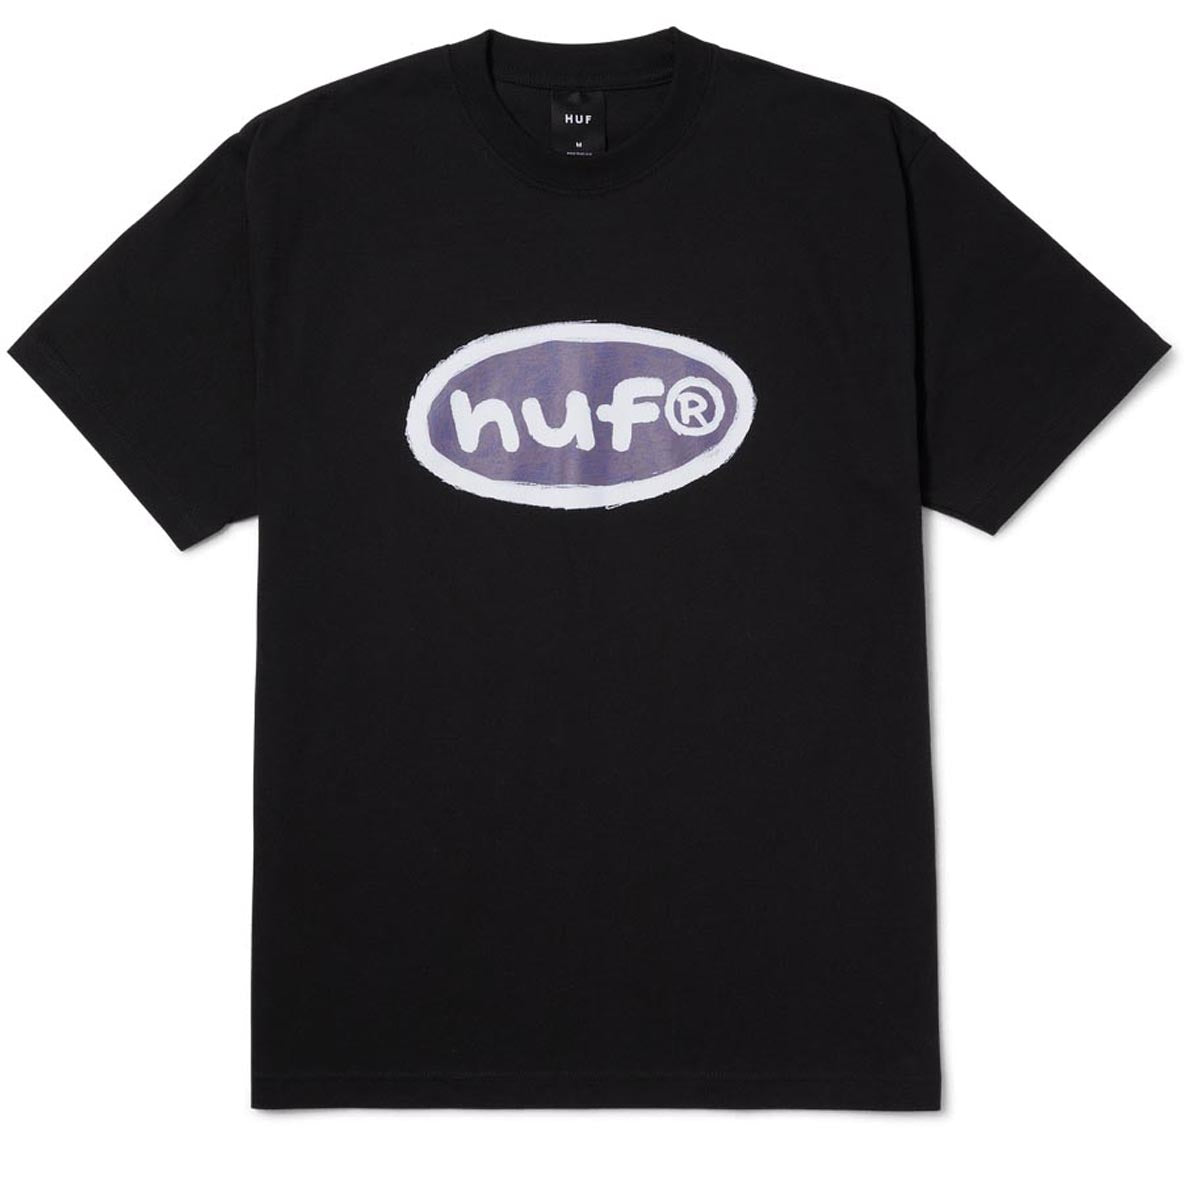 HUF Pencilled In T-Shirt - Black image 1